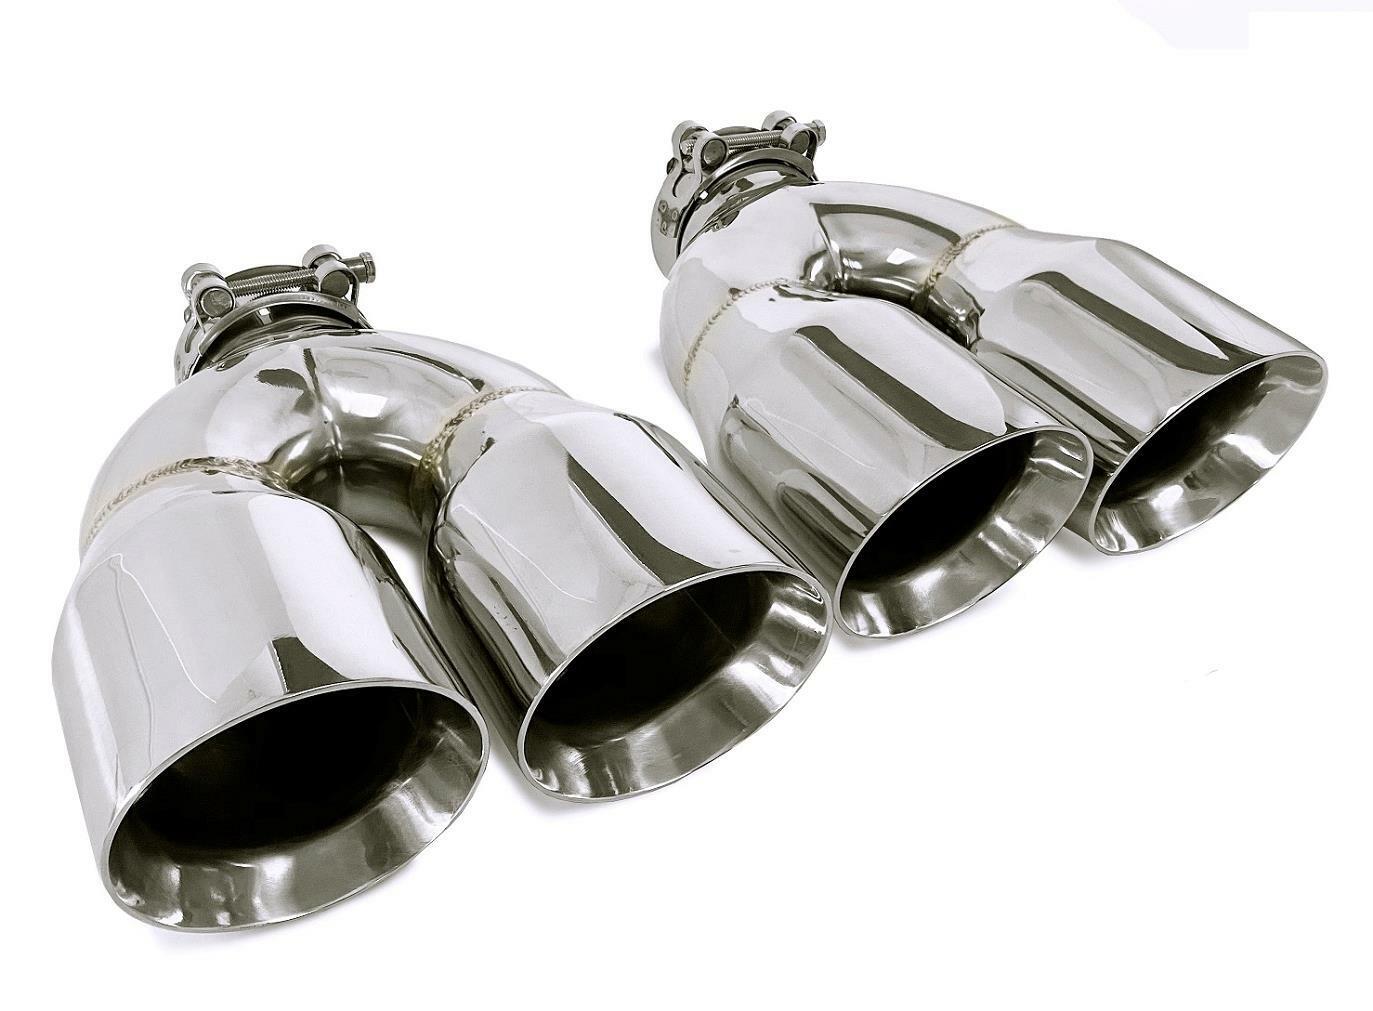 PAIR OF TWO STAINLESS STEEL UNIVERSAL DUAL EXHAUST TIPS 3.5